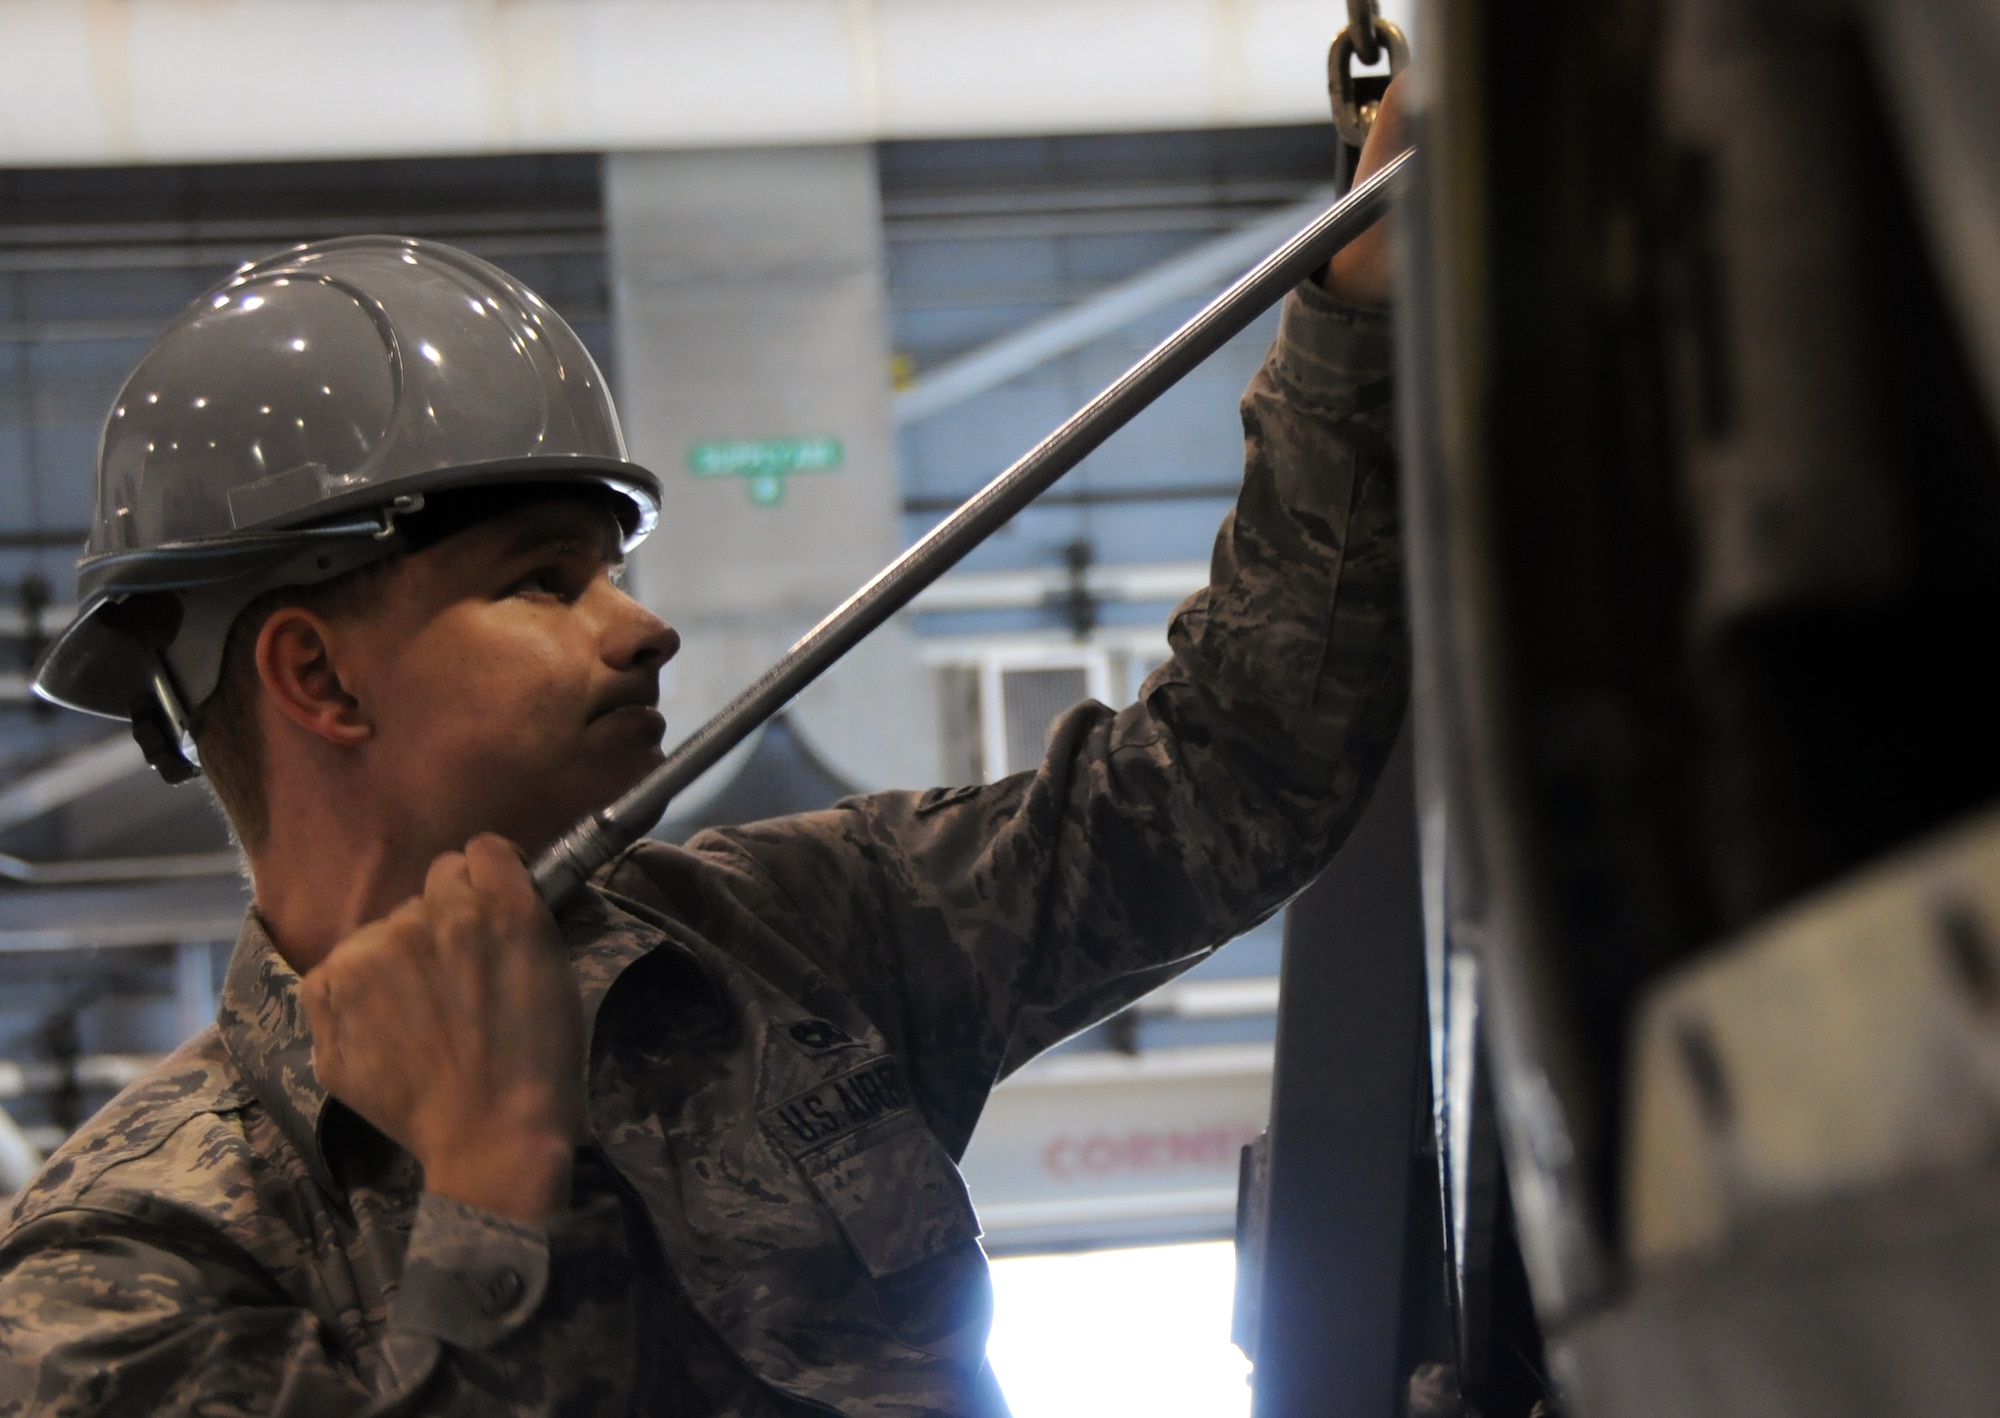 Airman 1st Class Matthew Brady, 94th Maintenance Squadron aerospace propulsion technician, works on the engine of a C-130 Hercules at Dobbins Air Reserve Base, Ga., Sept. 25, 2014. A team of 44 Airmen and one C-130 are preparing to venture off to be a part of RED FLAG-Alaska 15-1. (U.S. Air Force photo by Senior Airman Daniel Phelps/Released)